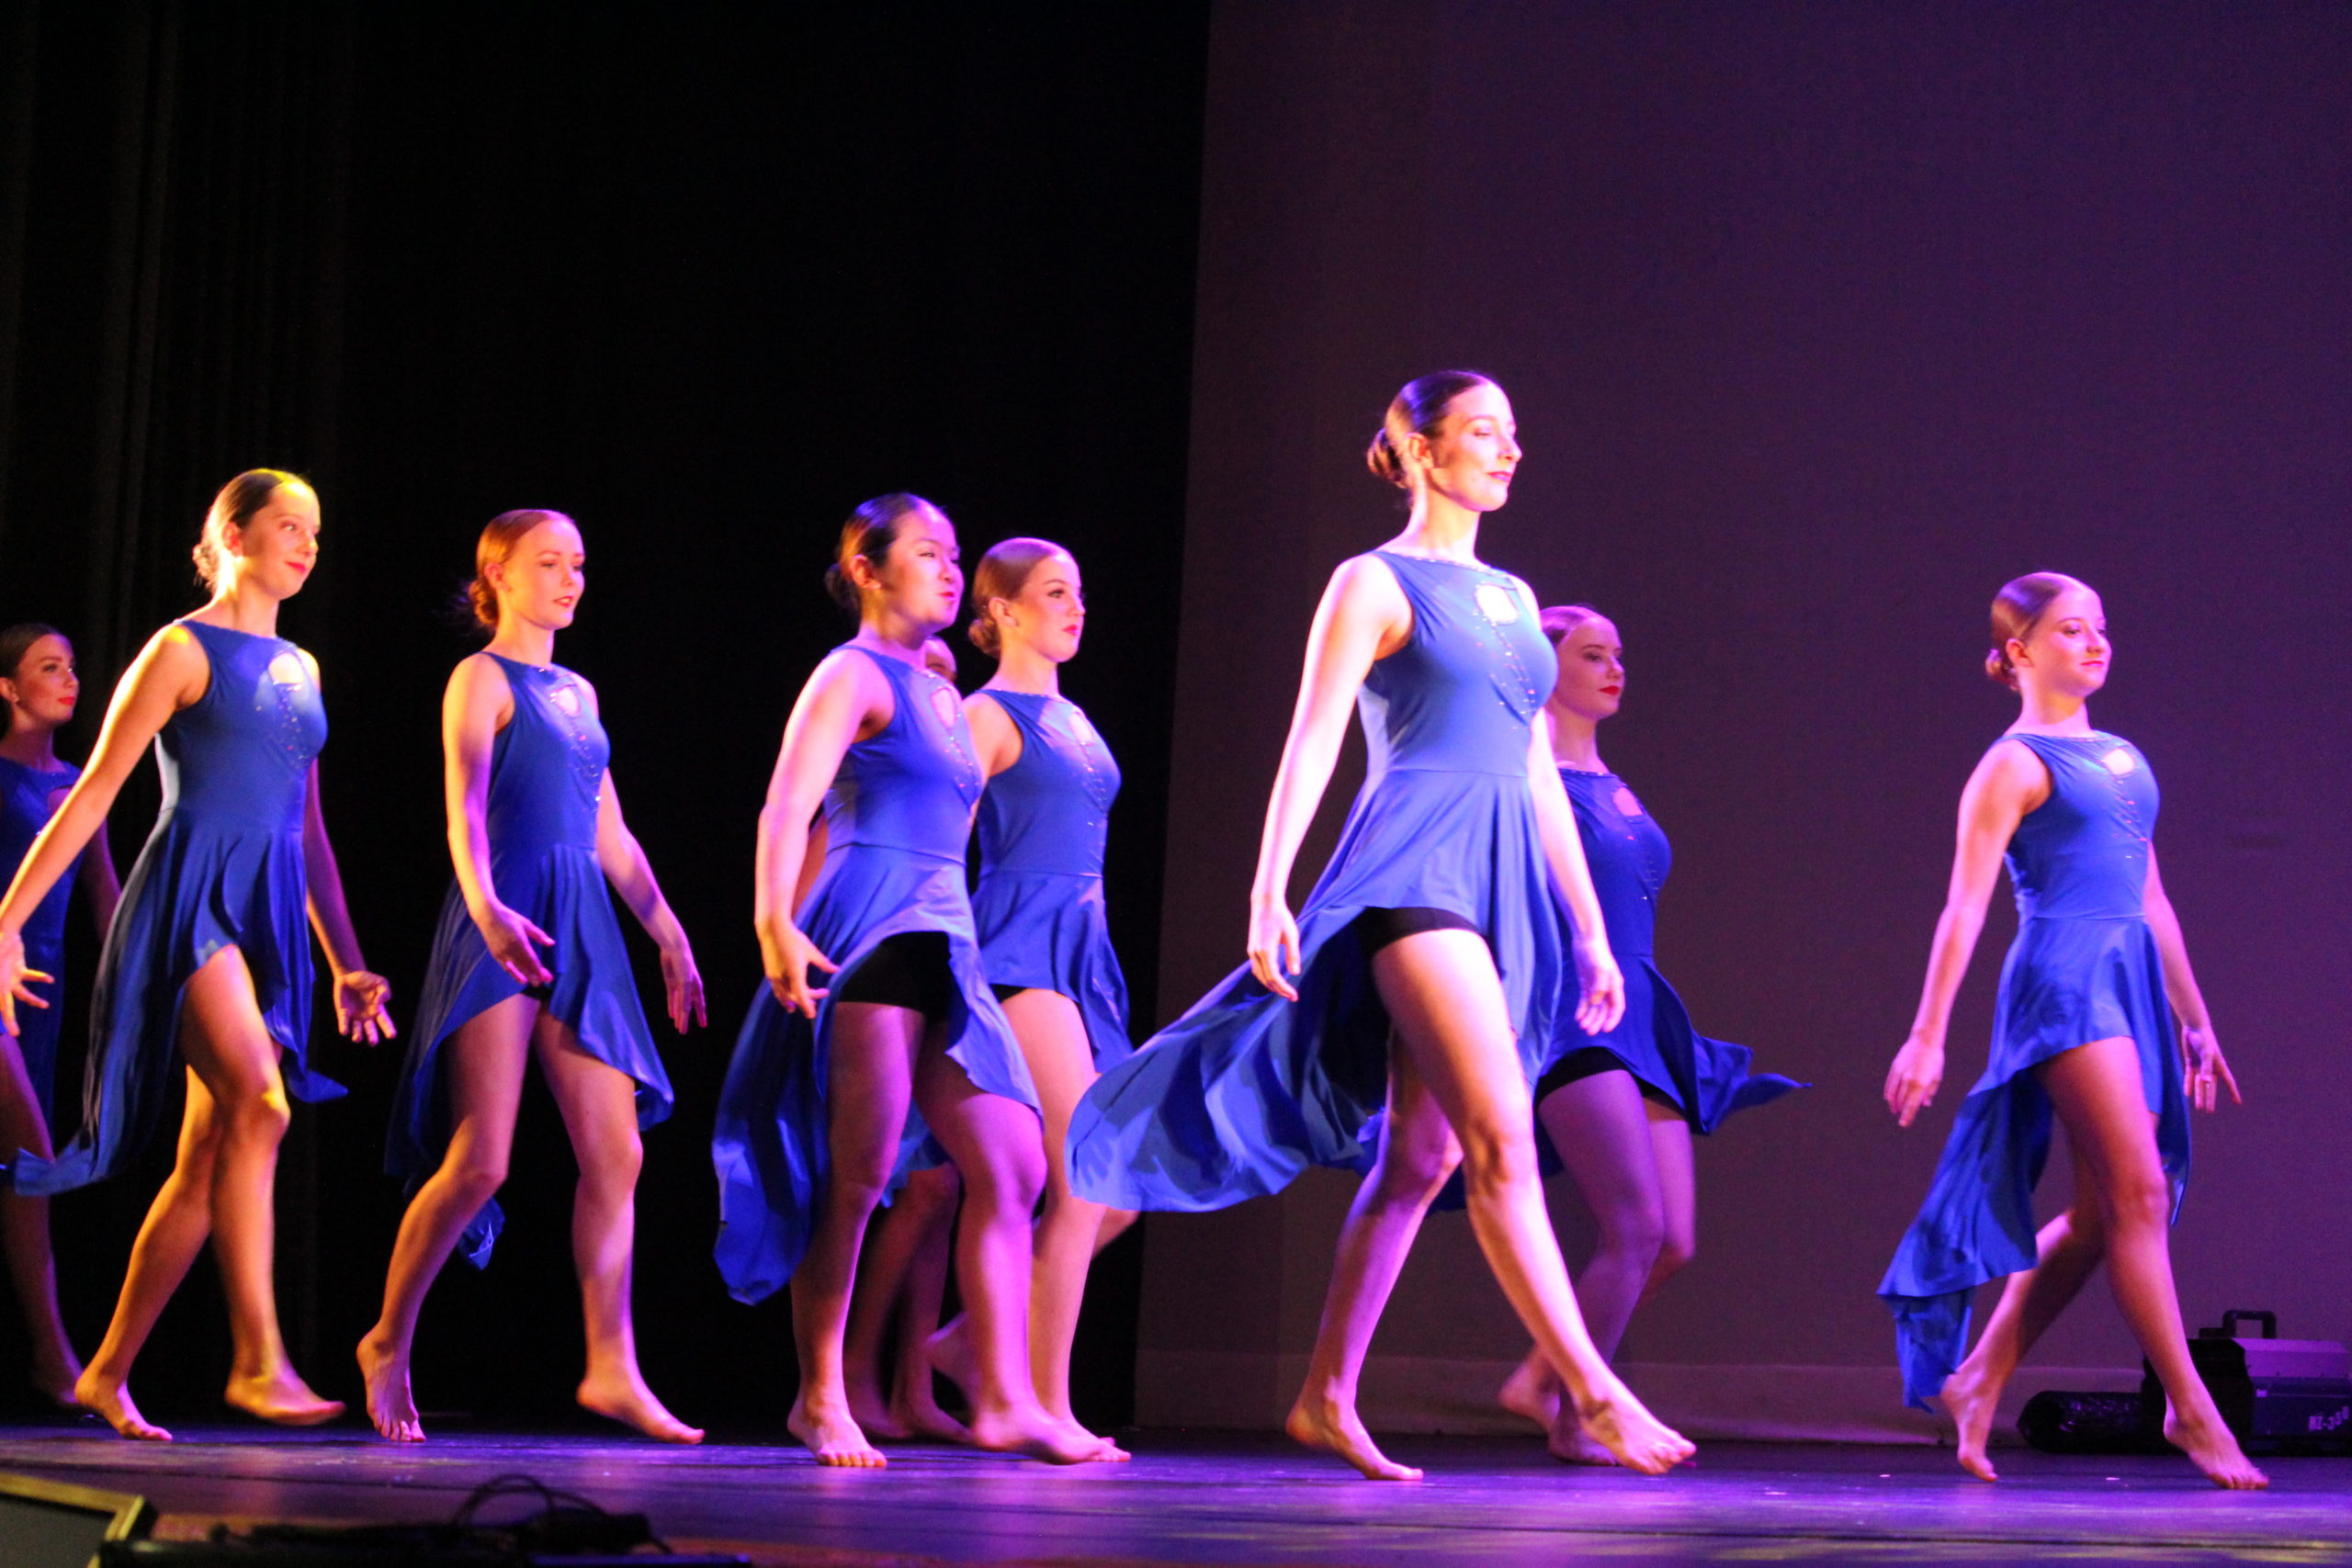 Rangitoto Ballet Troupe, all female, dressed in flowing purple ballet costumes dancing barefoot on a stage